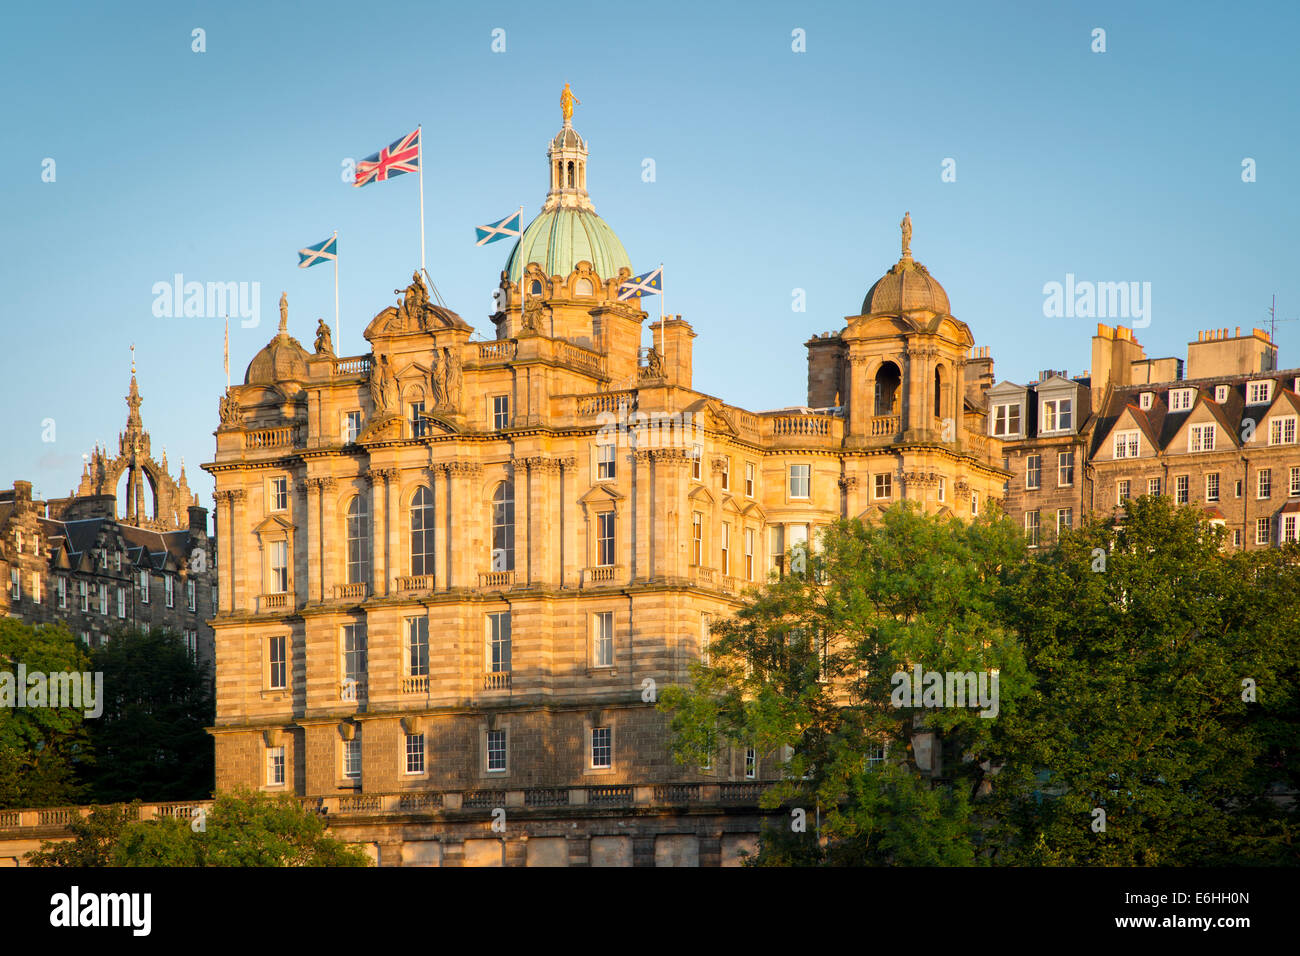 Flags fly over the Bank of Scotland building at sunset, Edinburgh, Scotland Stock Photo